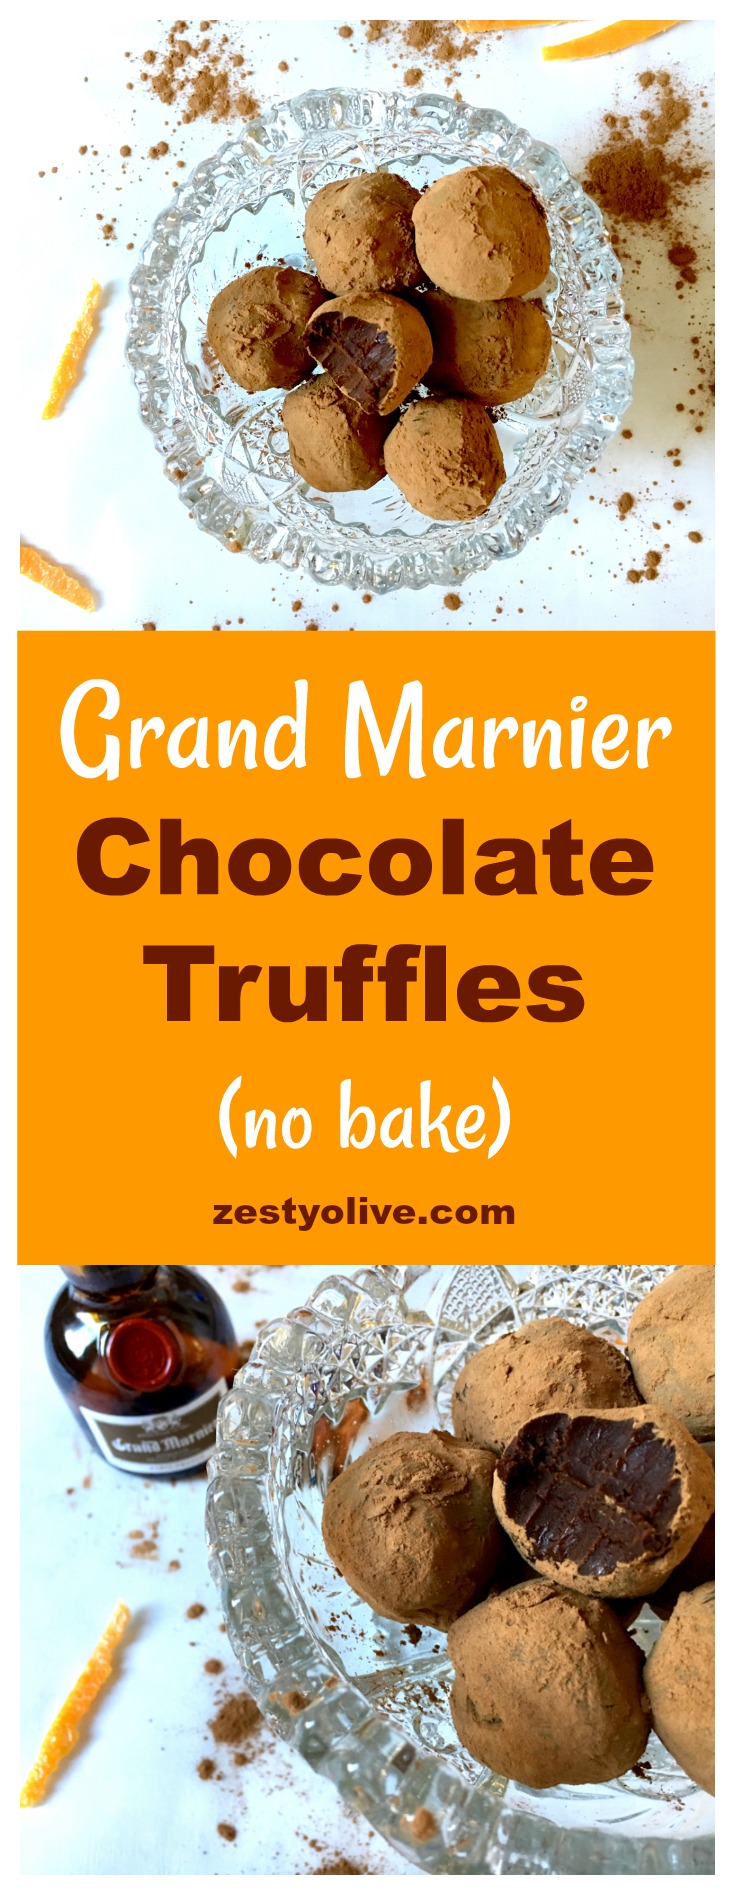 Grand Marnier Chocolate Truffles are smooth, rich, and elegant. They are a simple, no-bake treat flavored with a subtle orange liqueur.